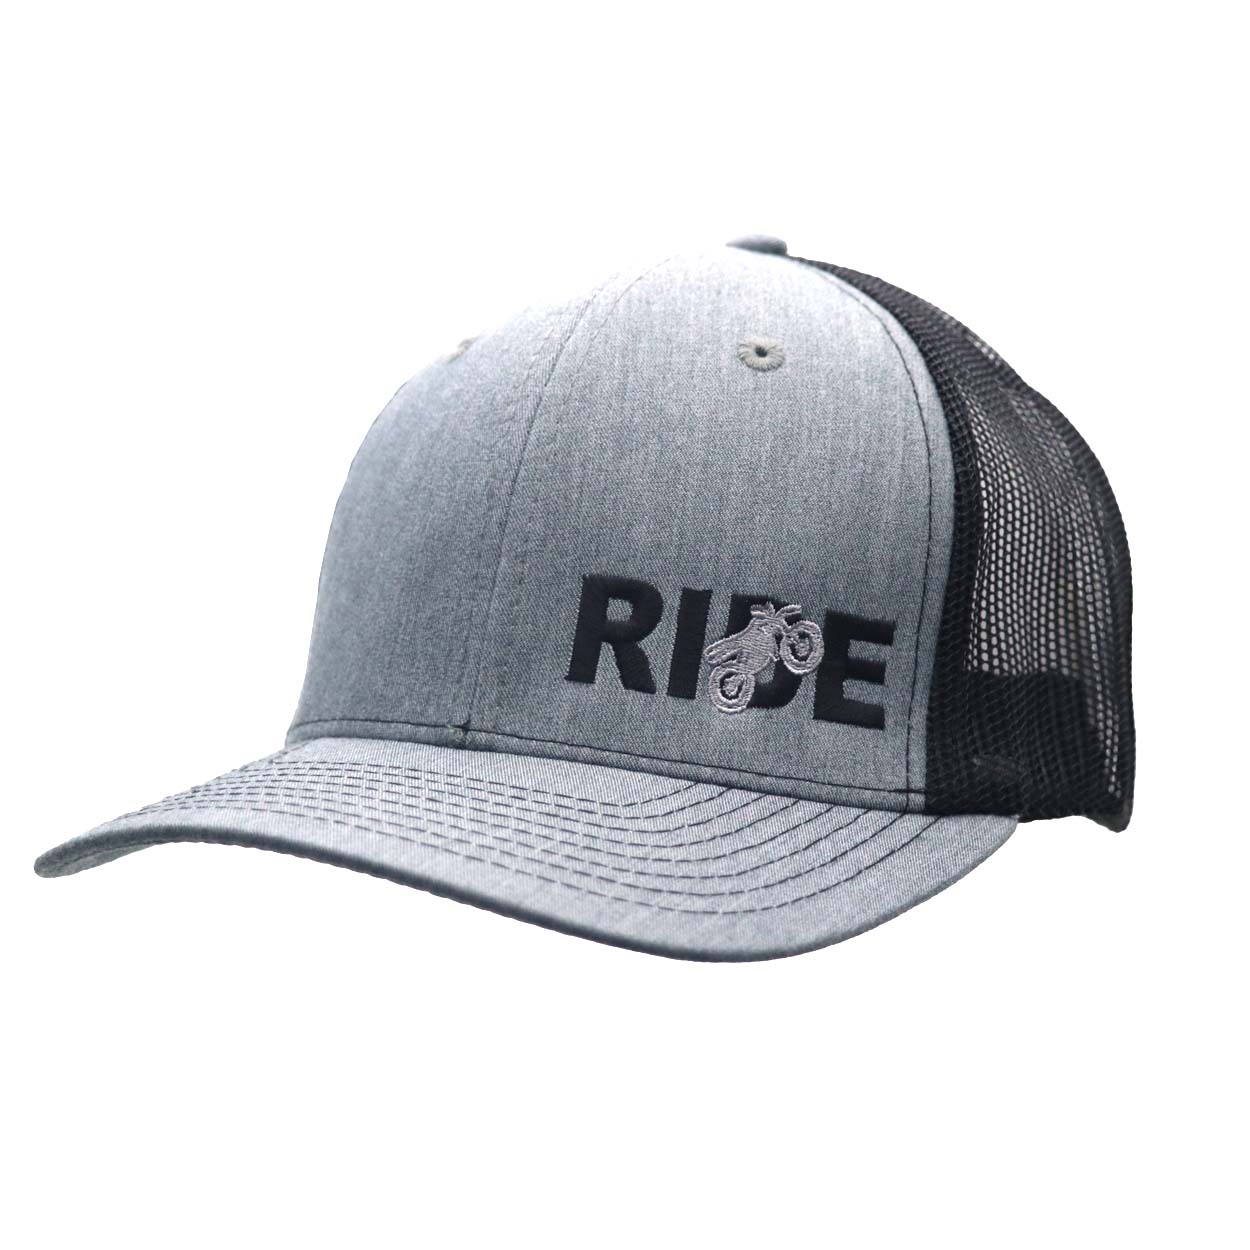 Ride Moto Logo Classic Pro Night Out Embroidered Snapback Trucker Hat Heather Gray/Black